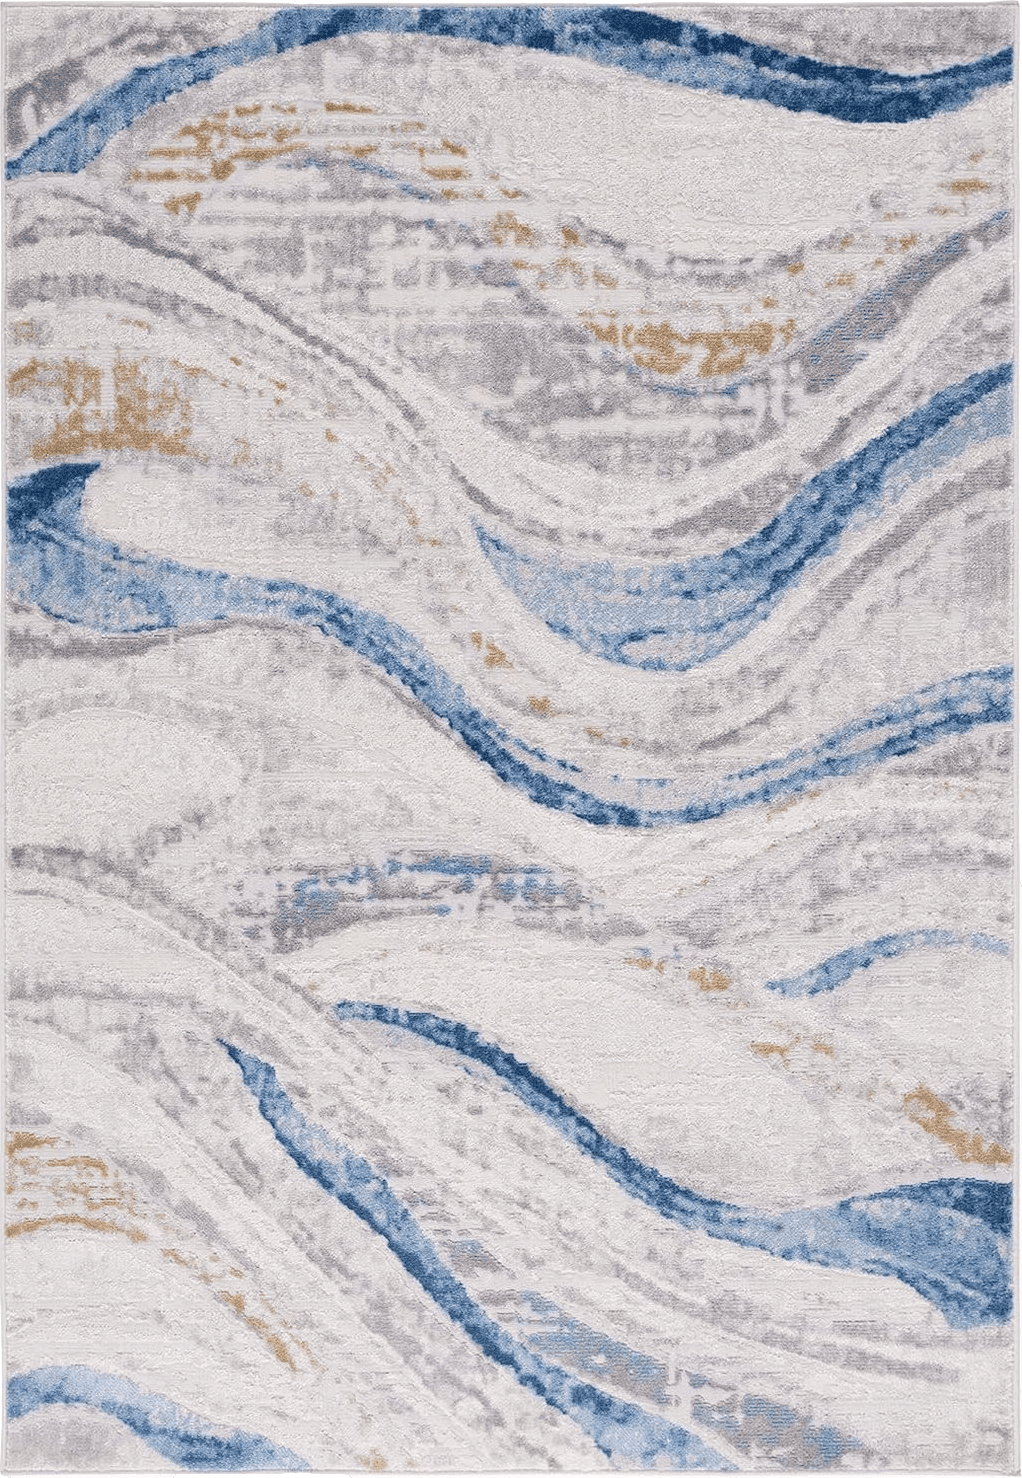 Area Grey Safavieh Palma Collection Area Rug - 9' x 12', Beige & Light Blue, Modern Abstract Design, Non-Shedding & Easy Care, Ideal for High Traffic Areas in Living Room, Bedroom (PAM334A)